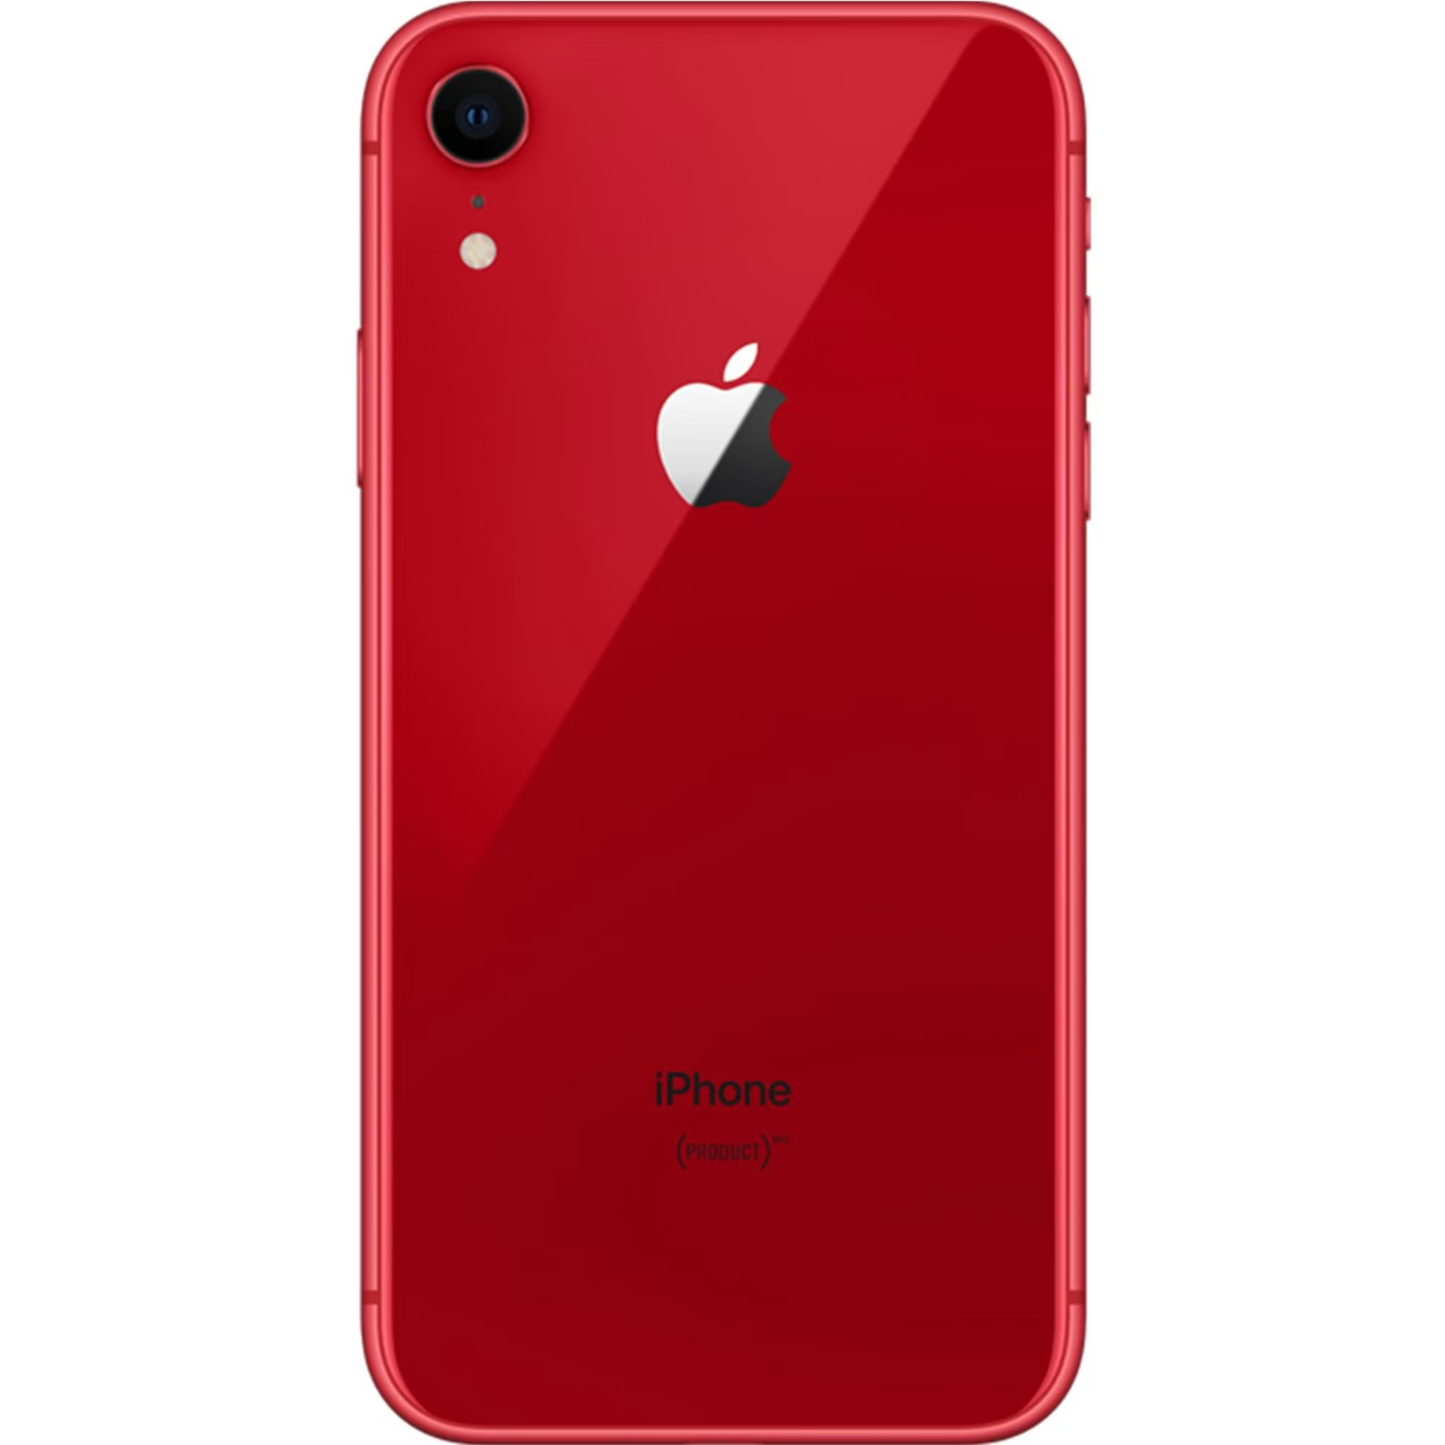 iPhone XR (64gb) - RED